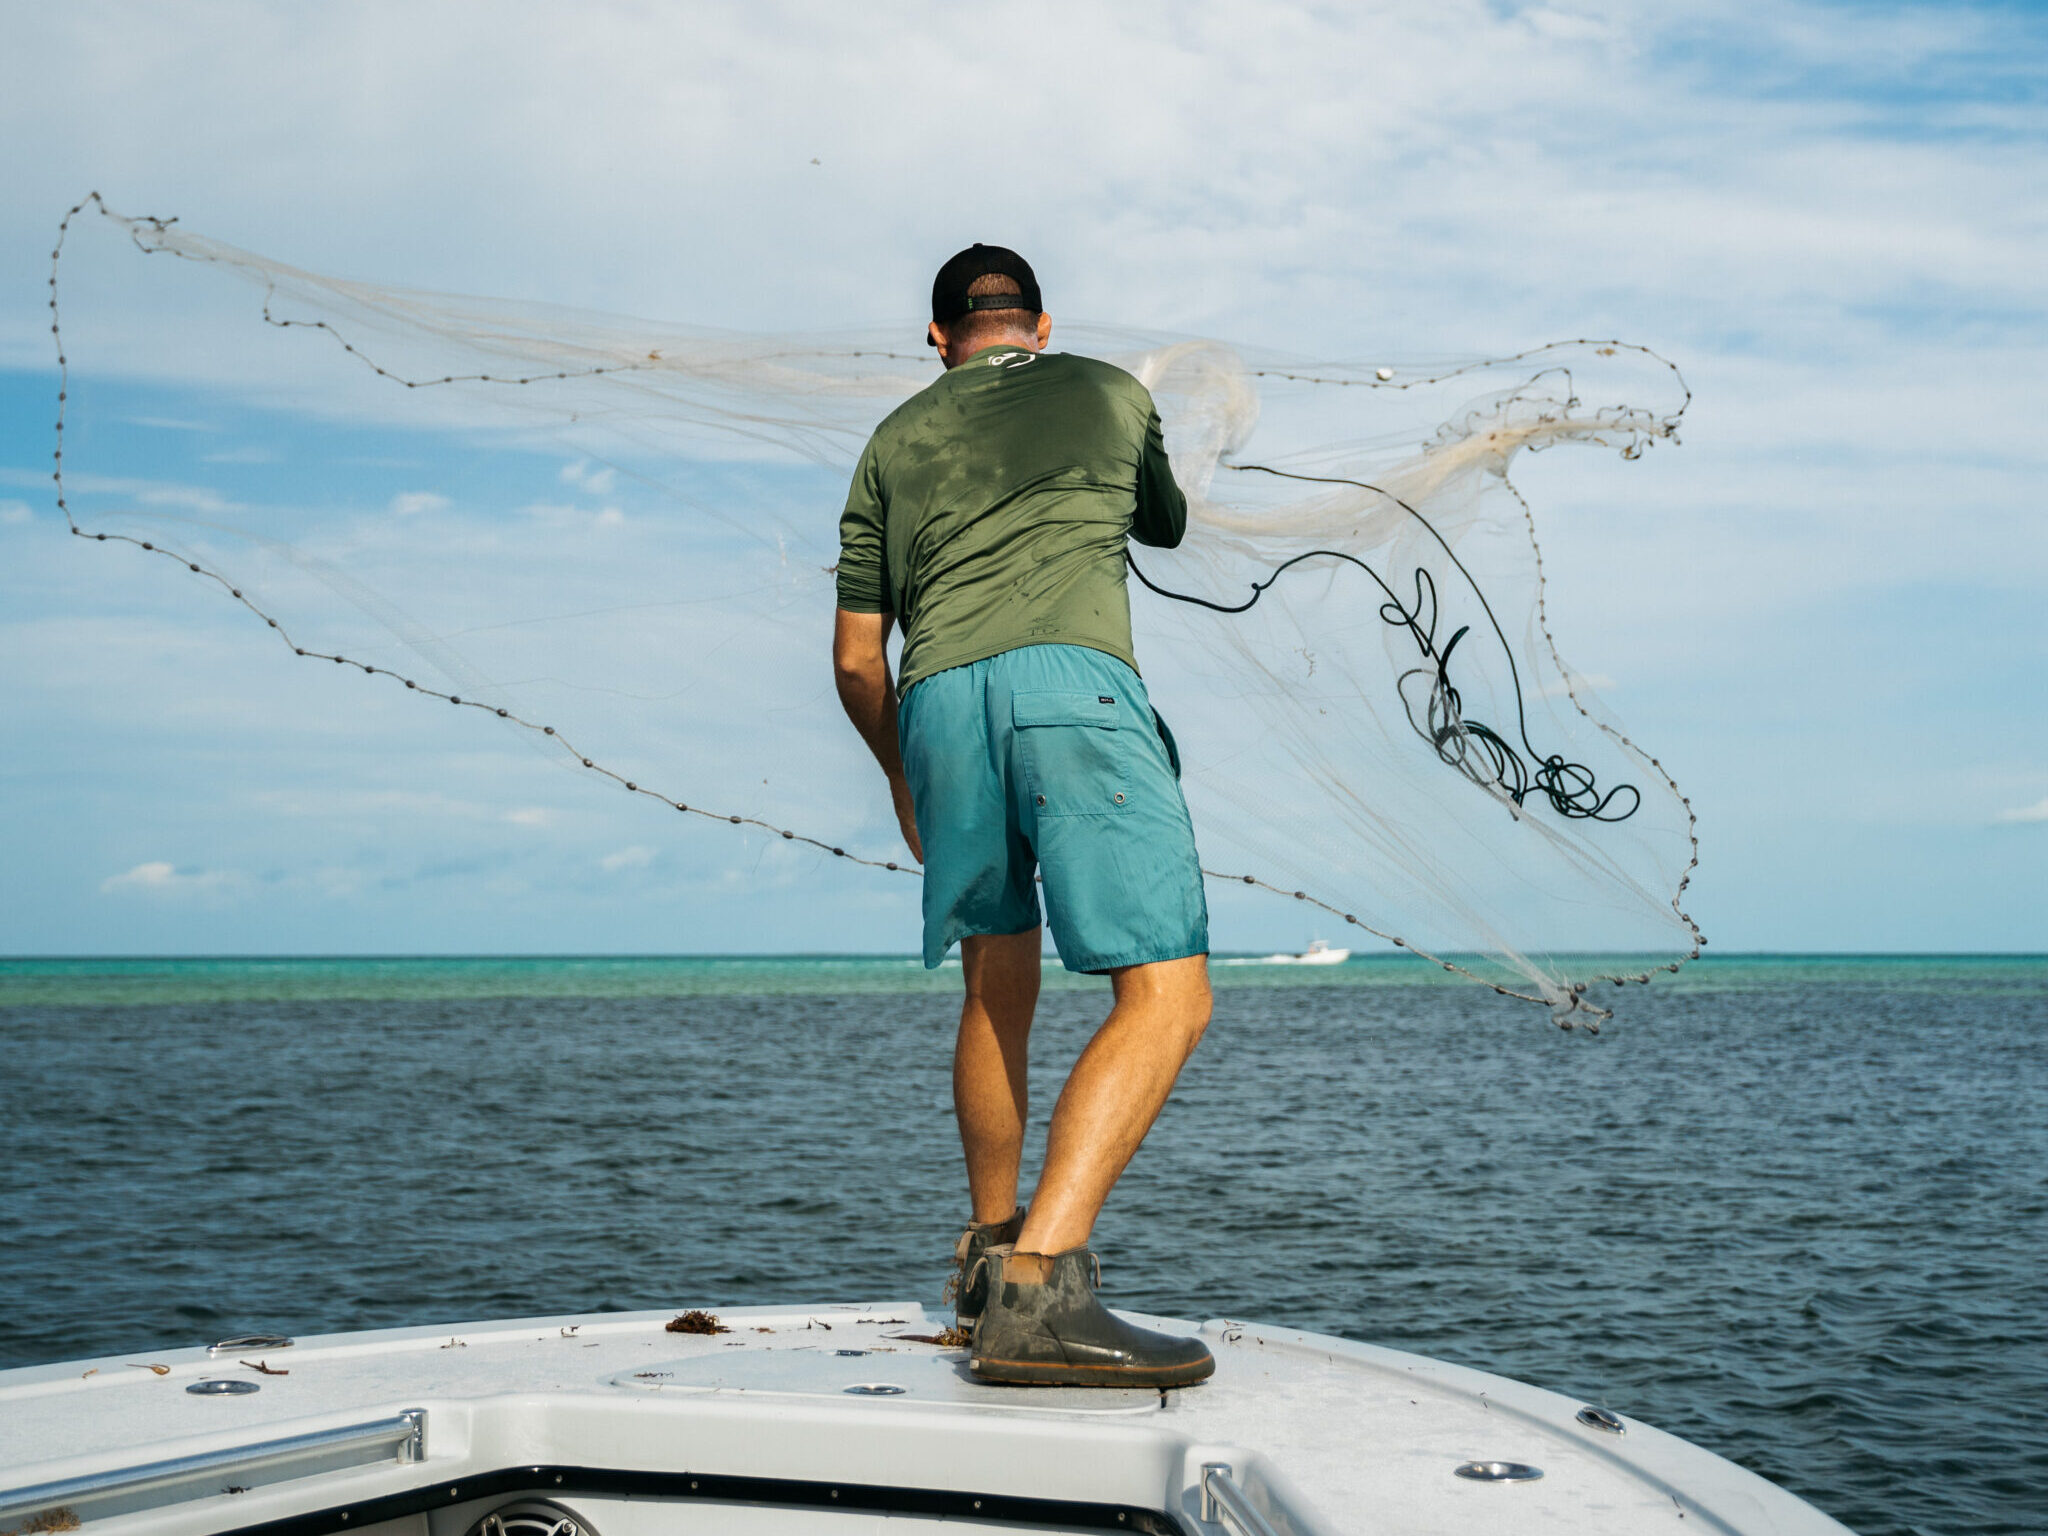 Captain throws bait net in hopes of catching pilchards on a fishing charter in Florida, preparing for an offshore angling adventure.